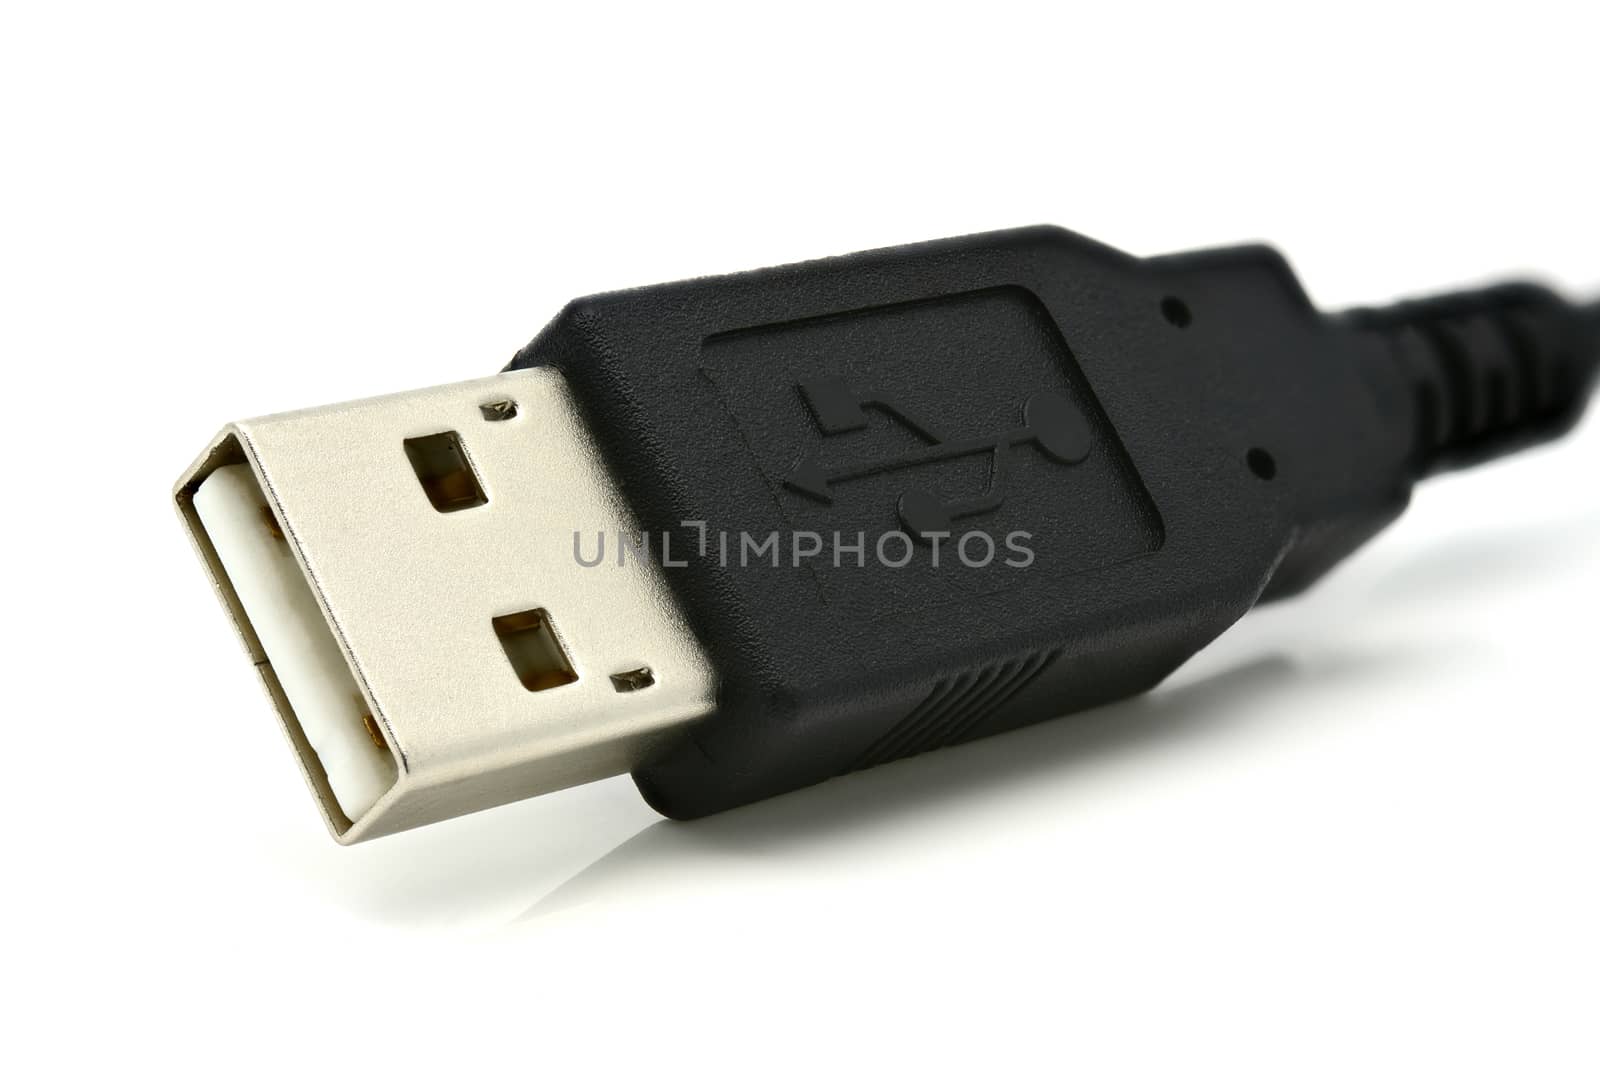 USB connection cable on a white background